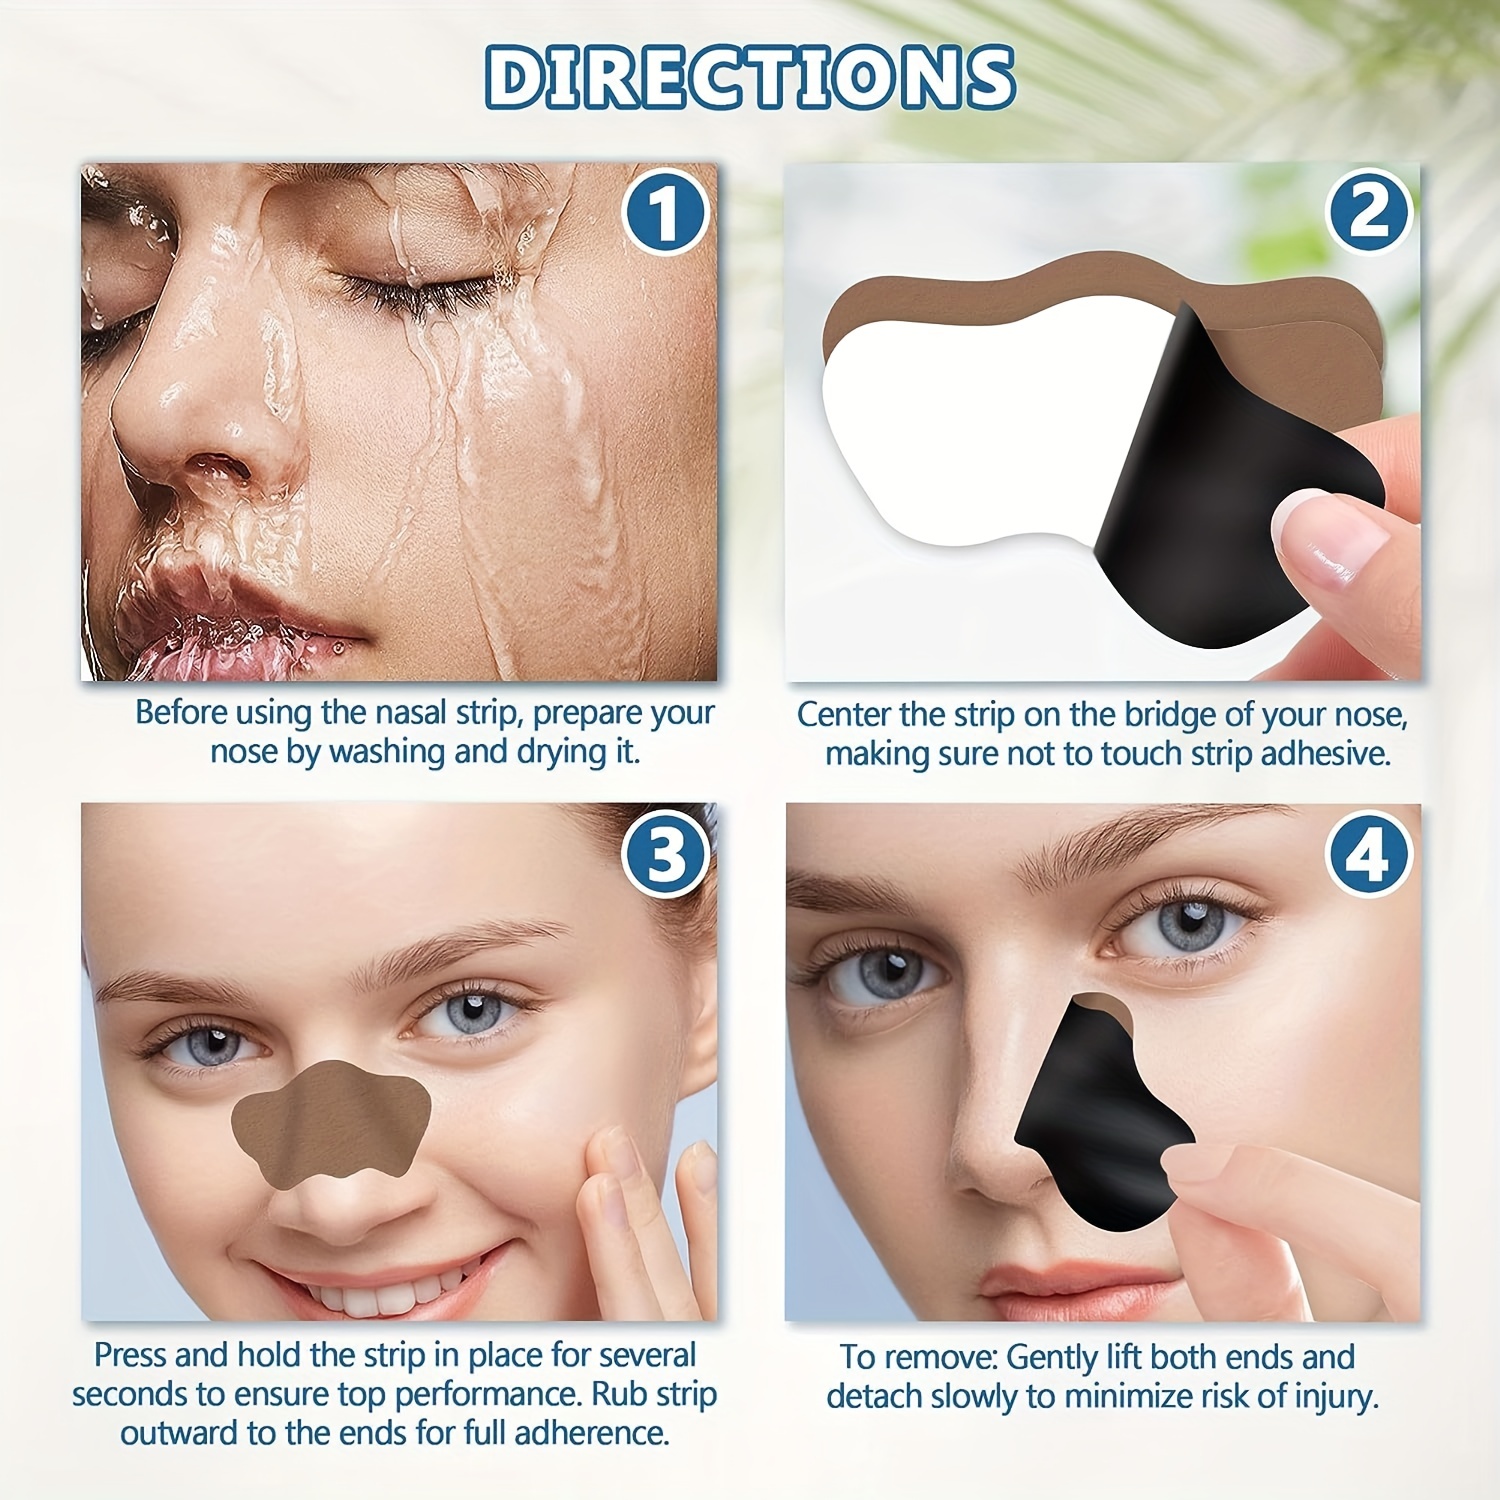 Nose Pincher Snore Strips Snore Strips 10pcs Nose Stop Clips Nasal